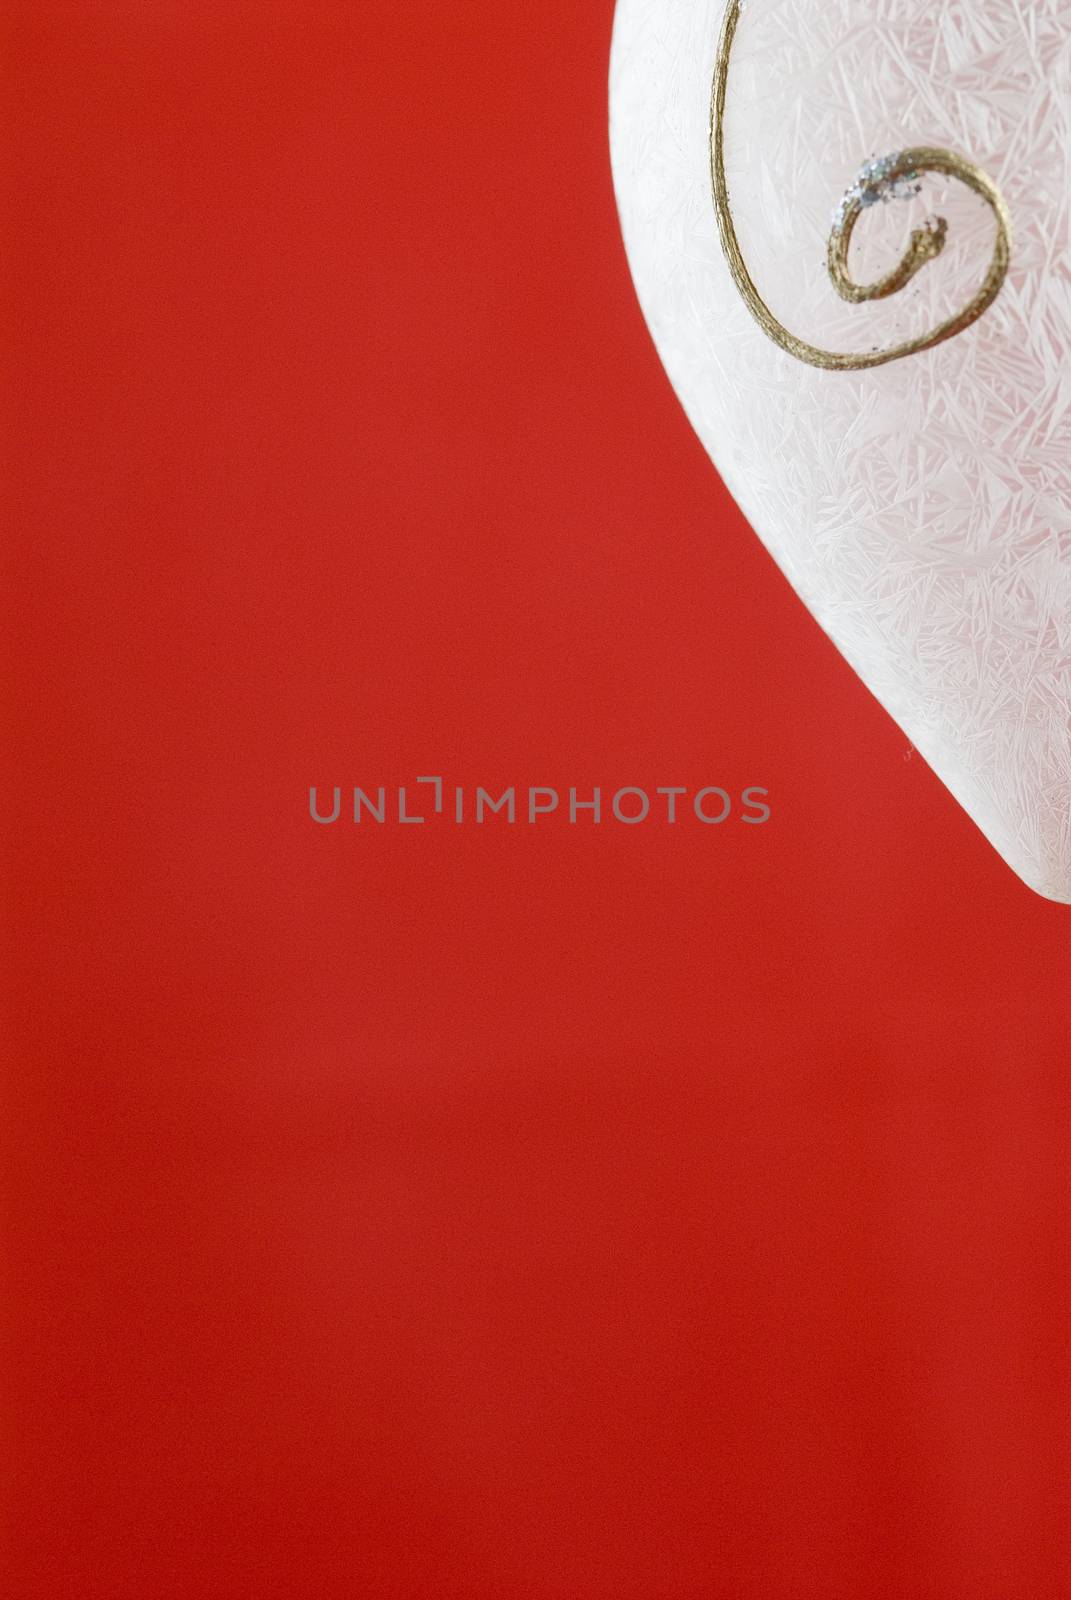 A white frosted glass Christmas decoration on red background